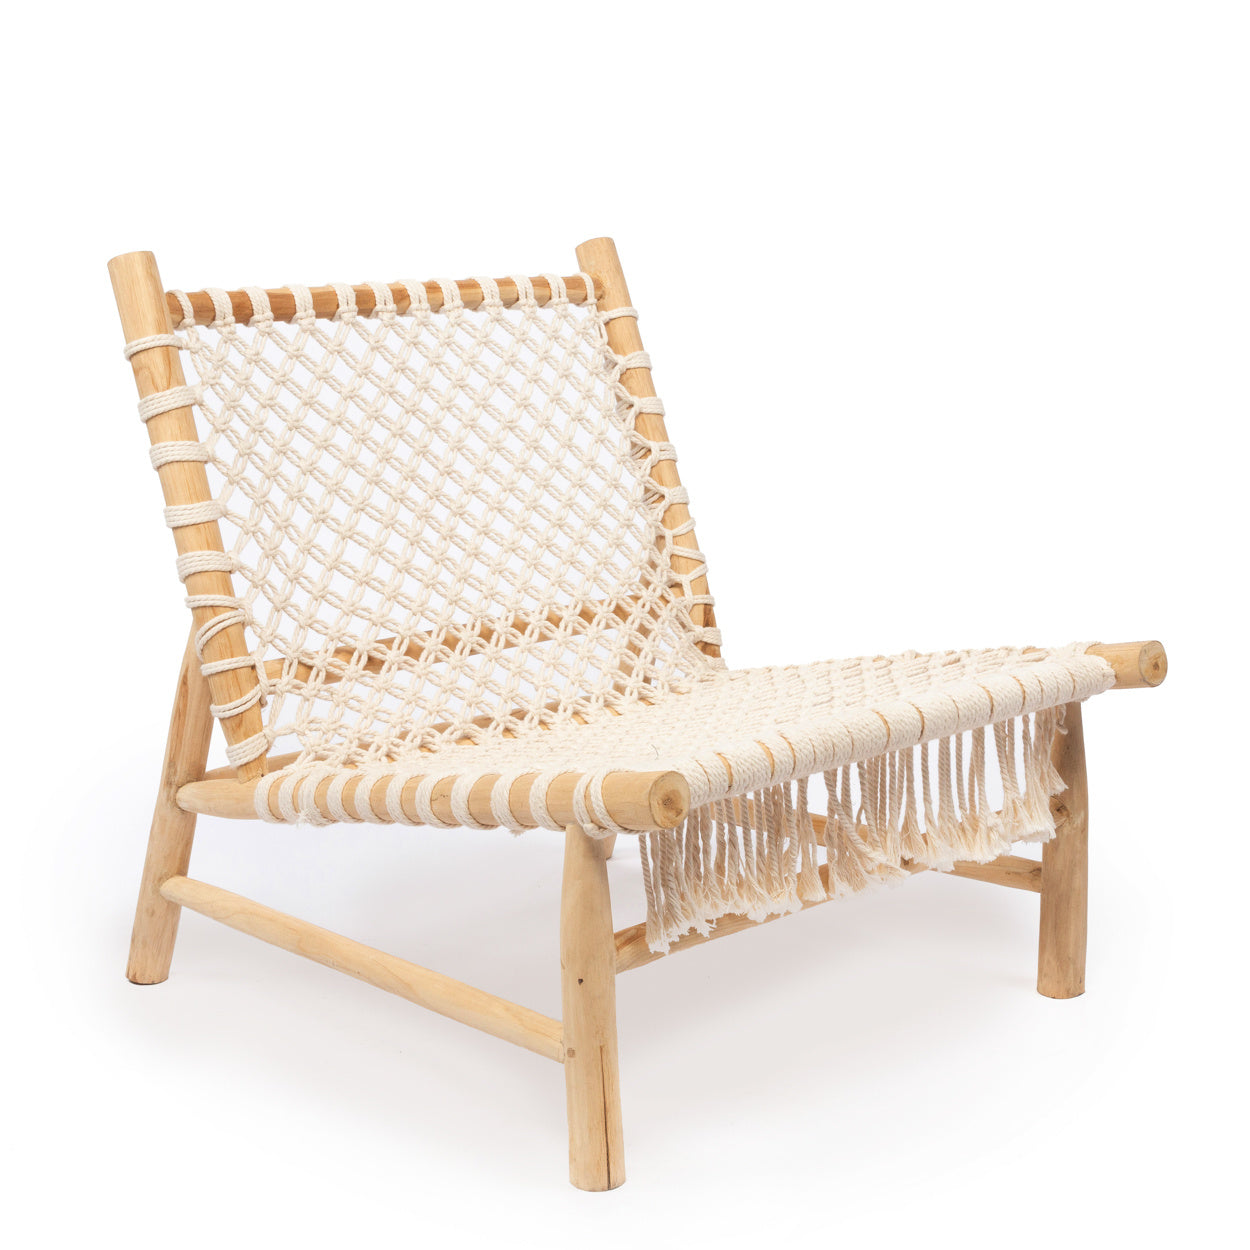 THE ISLAND Rope One Seater Chair half-front view